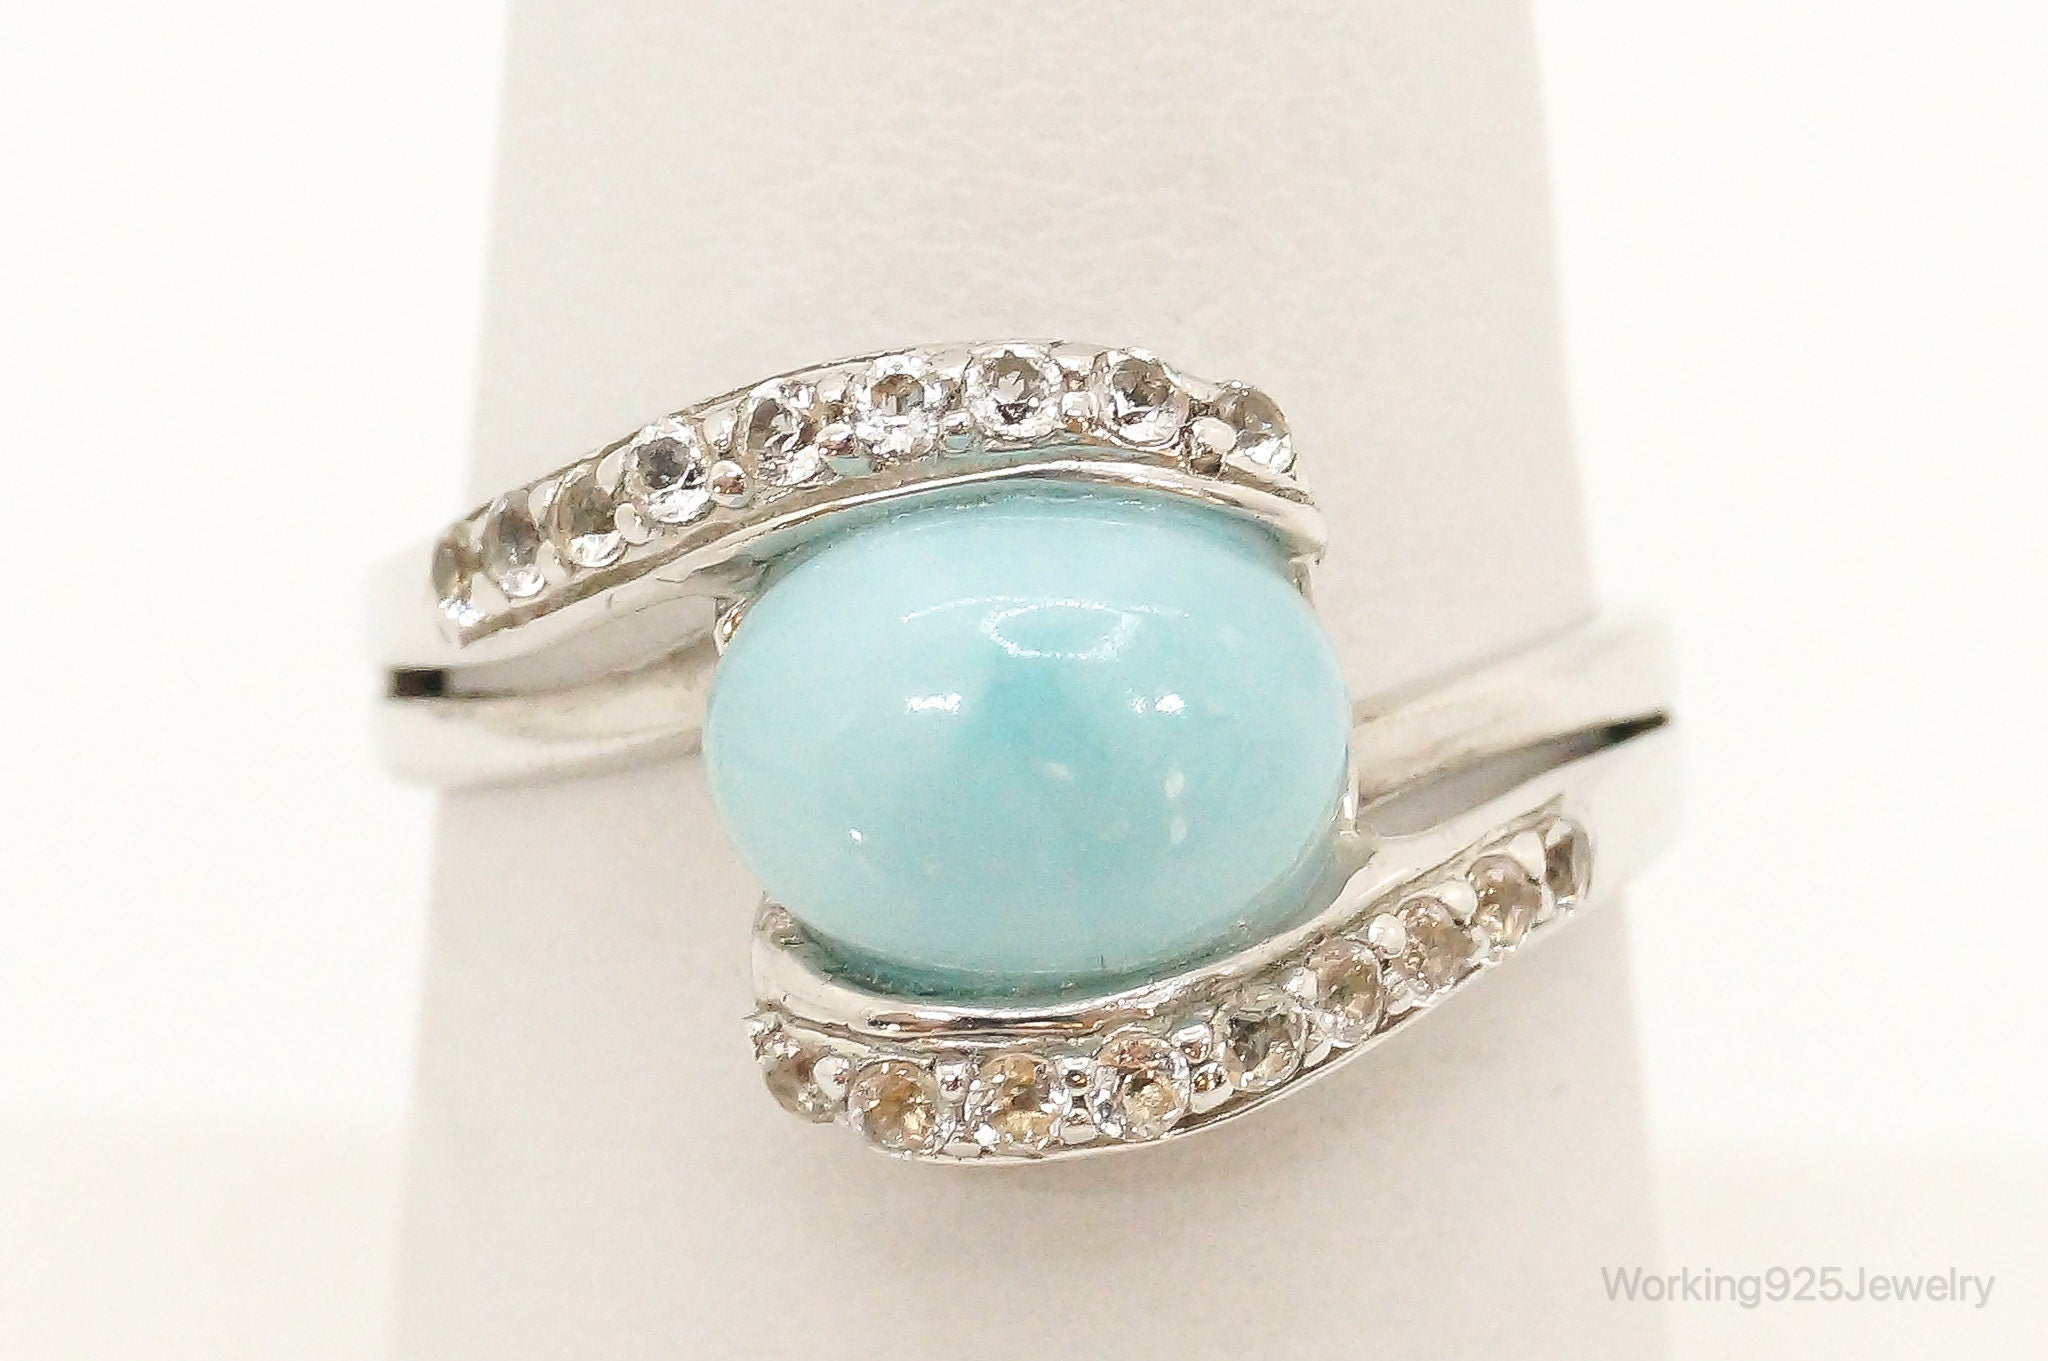 Blue Larimar Cubic Zirconia Sterling Silver Ring - Size 7